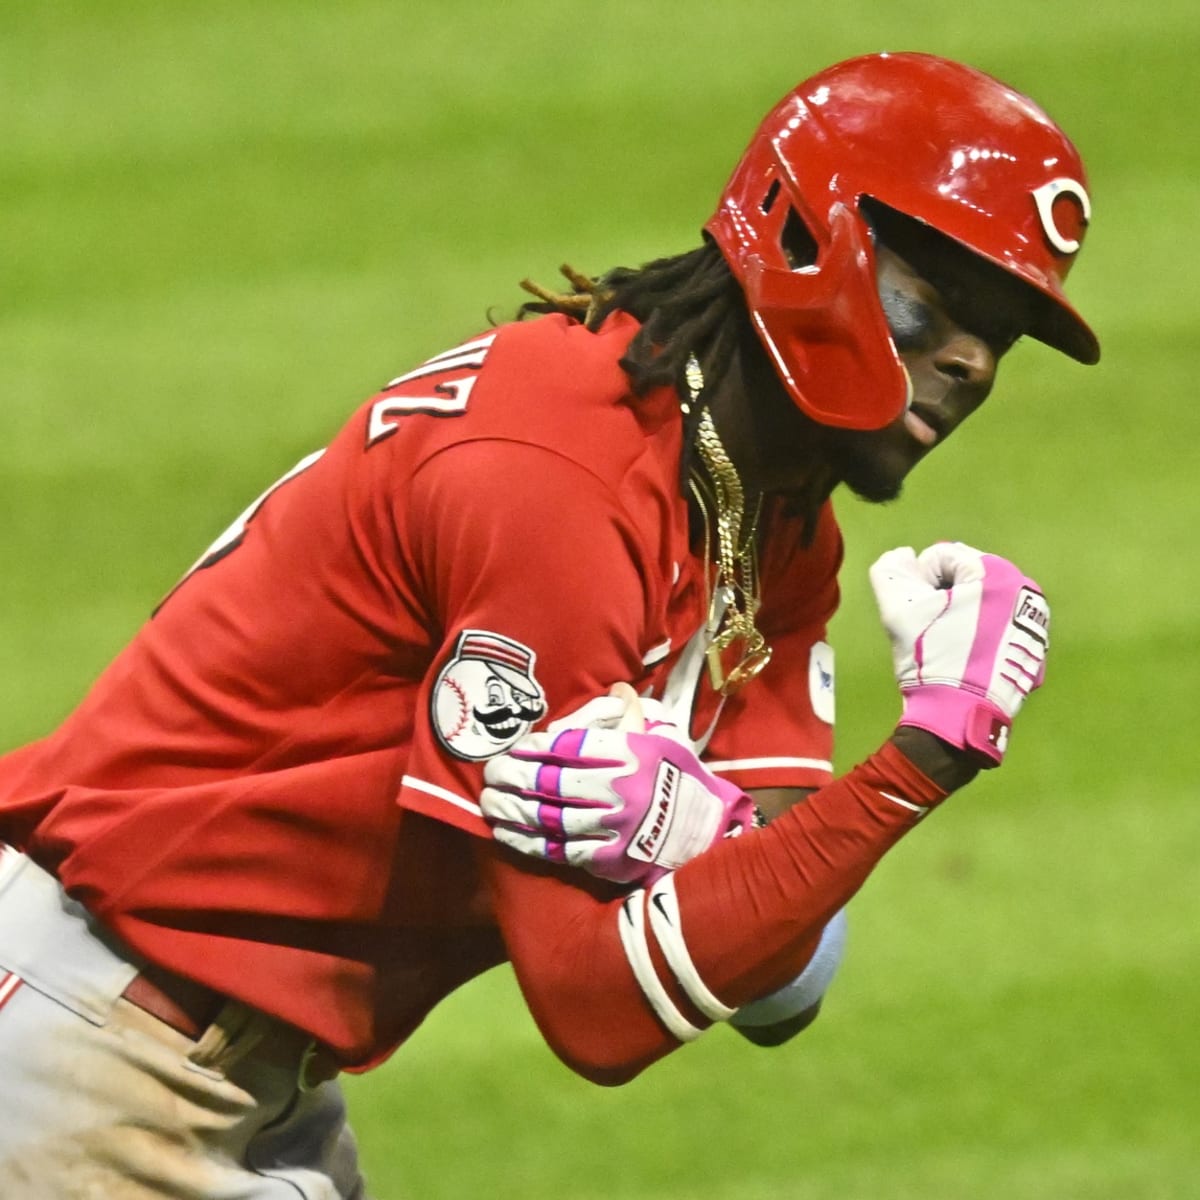 Reds rout Nationals 9-2 to keep slim playoff hopes alive